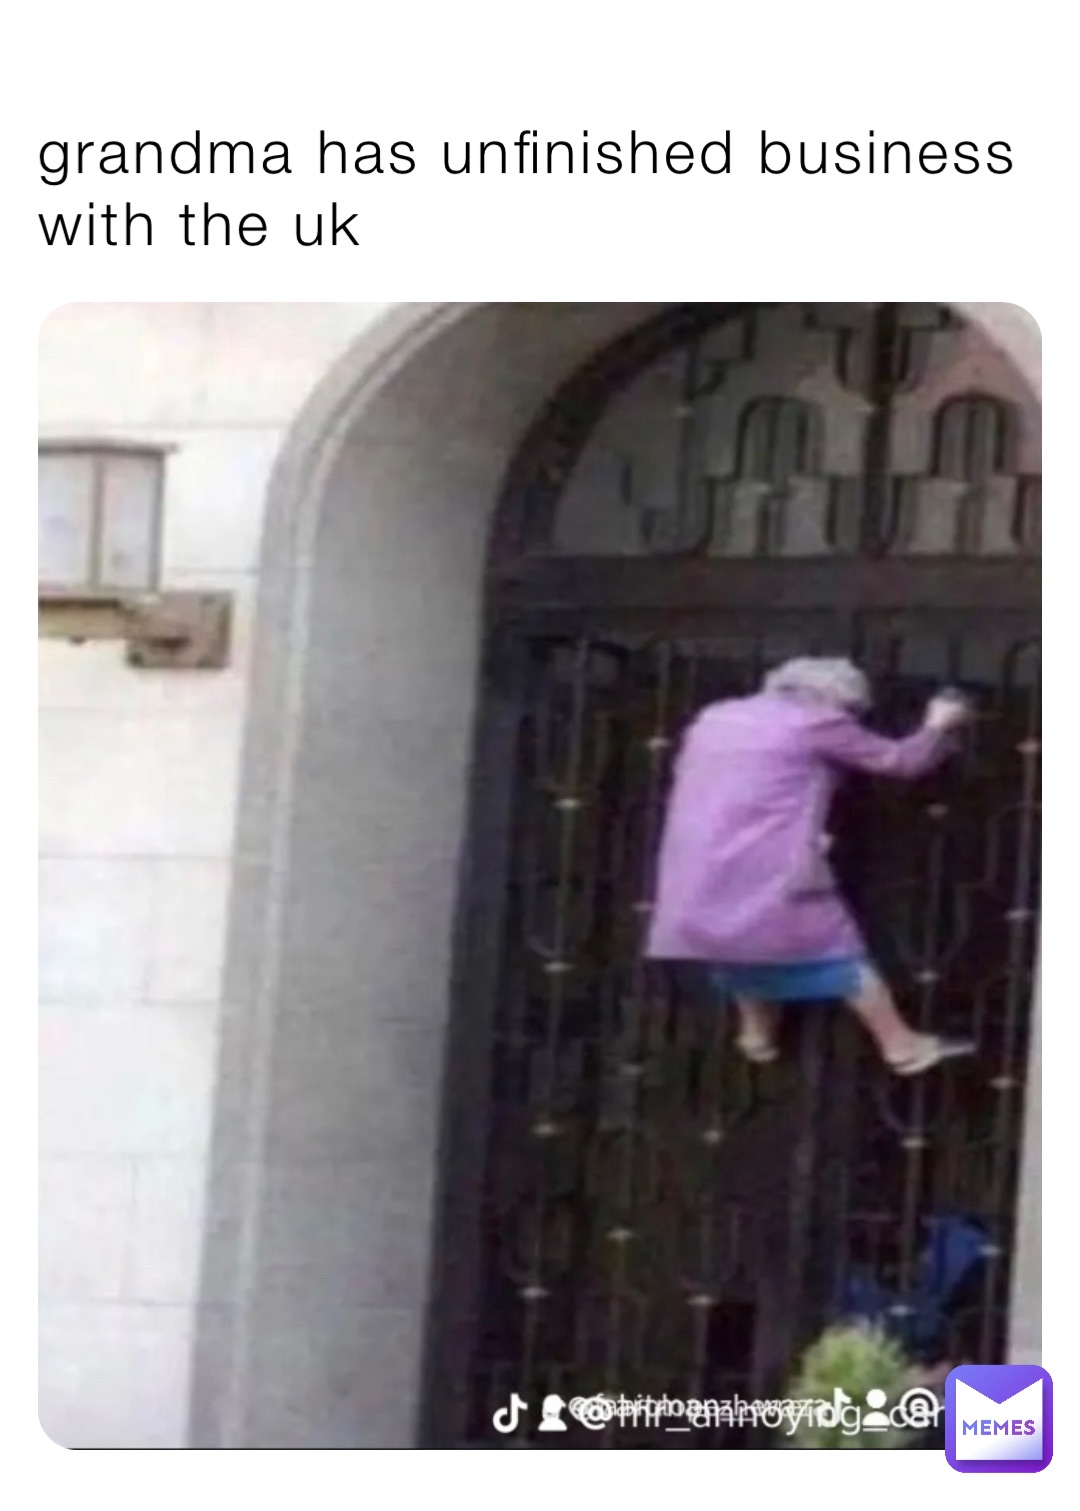 grandma has unfinished business with the uk